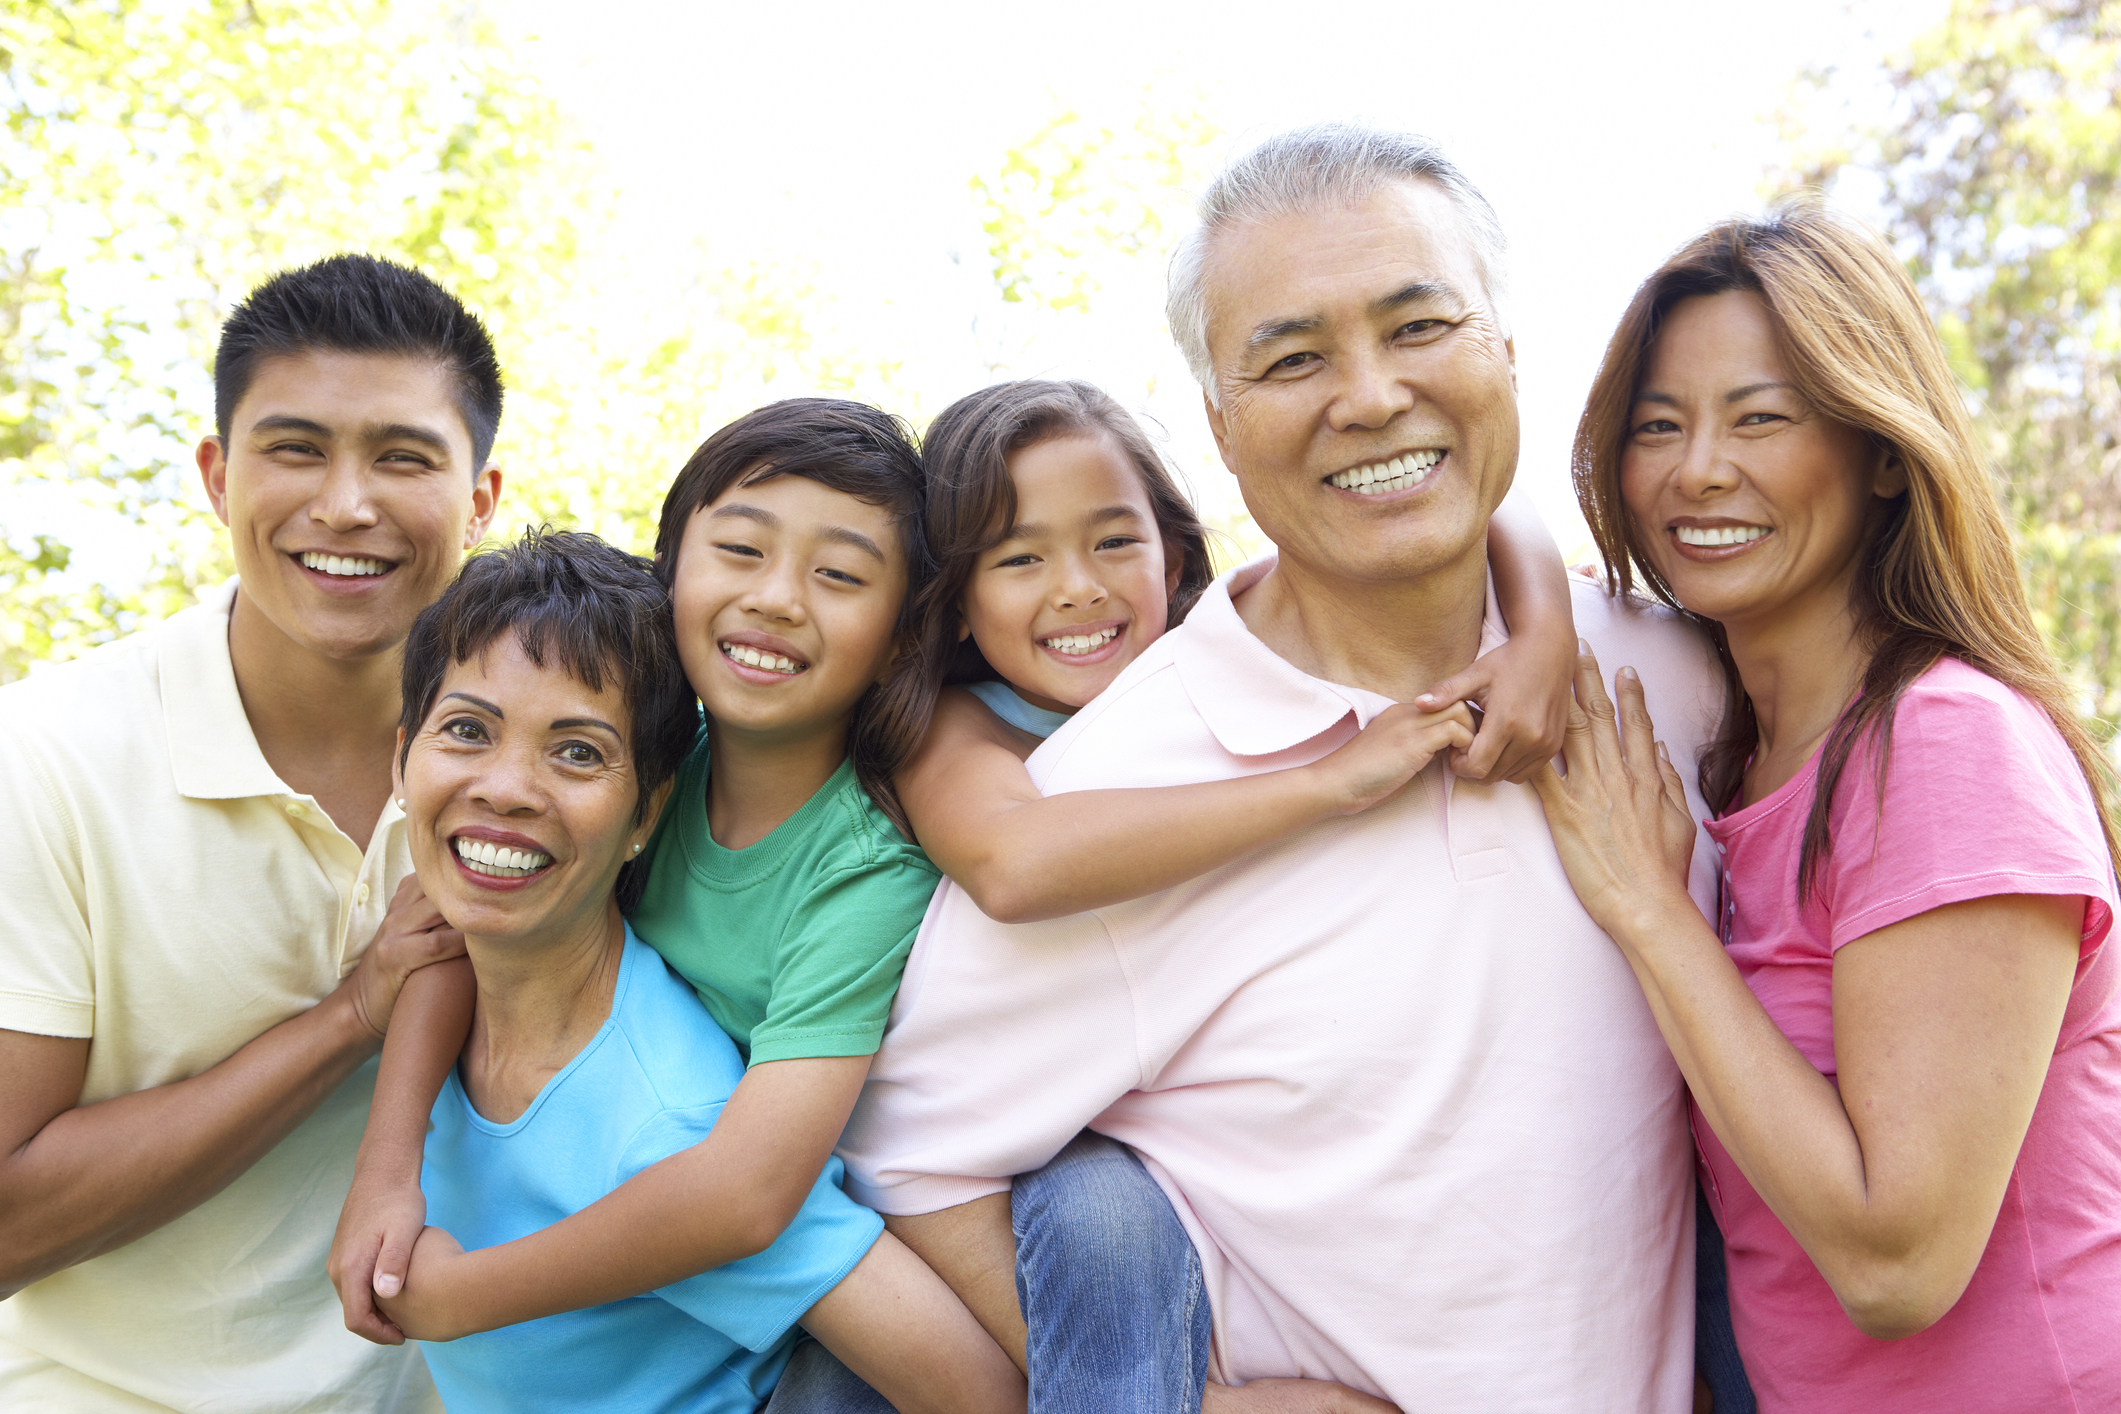 dental insurance will help with the cost of braces for the entire family